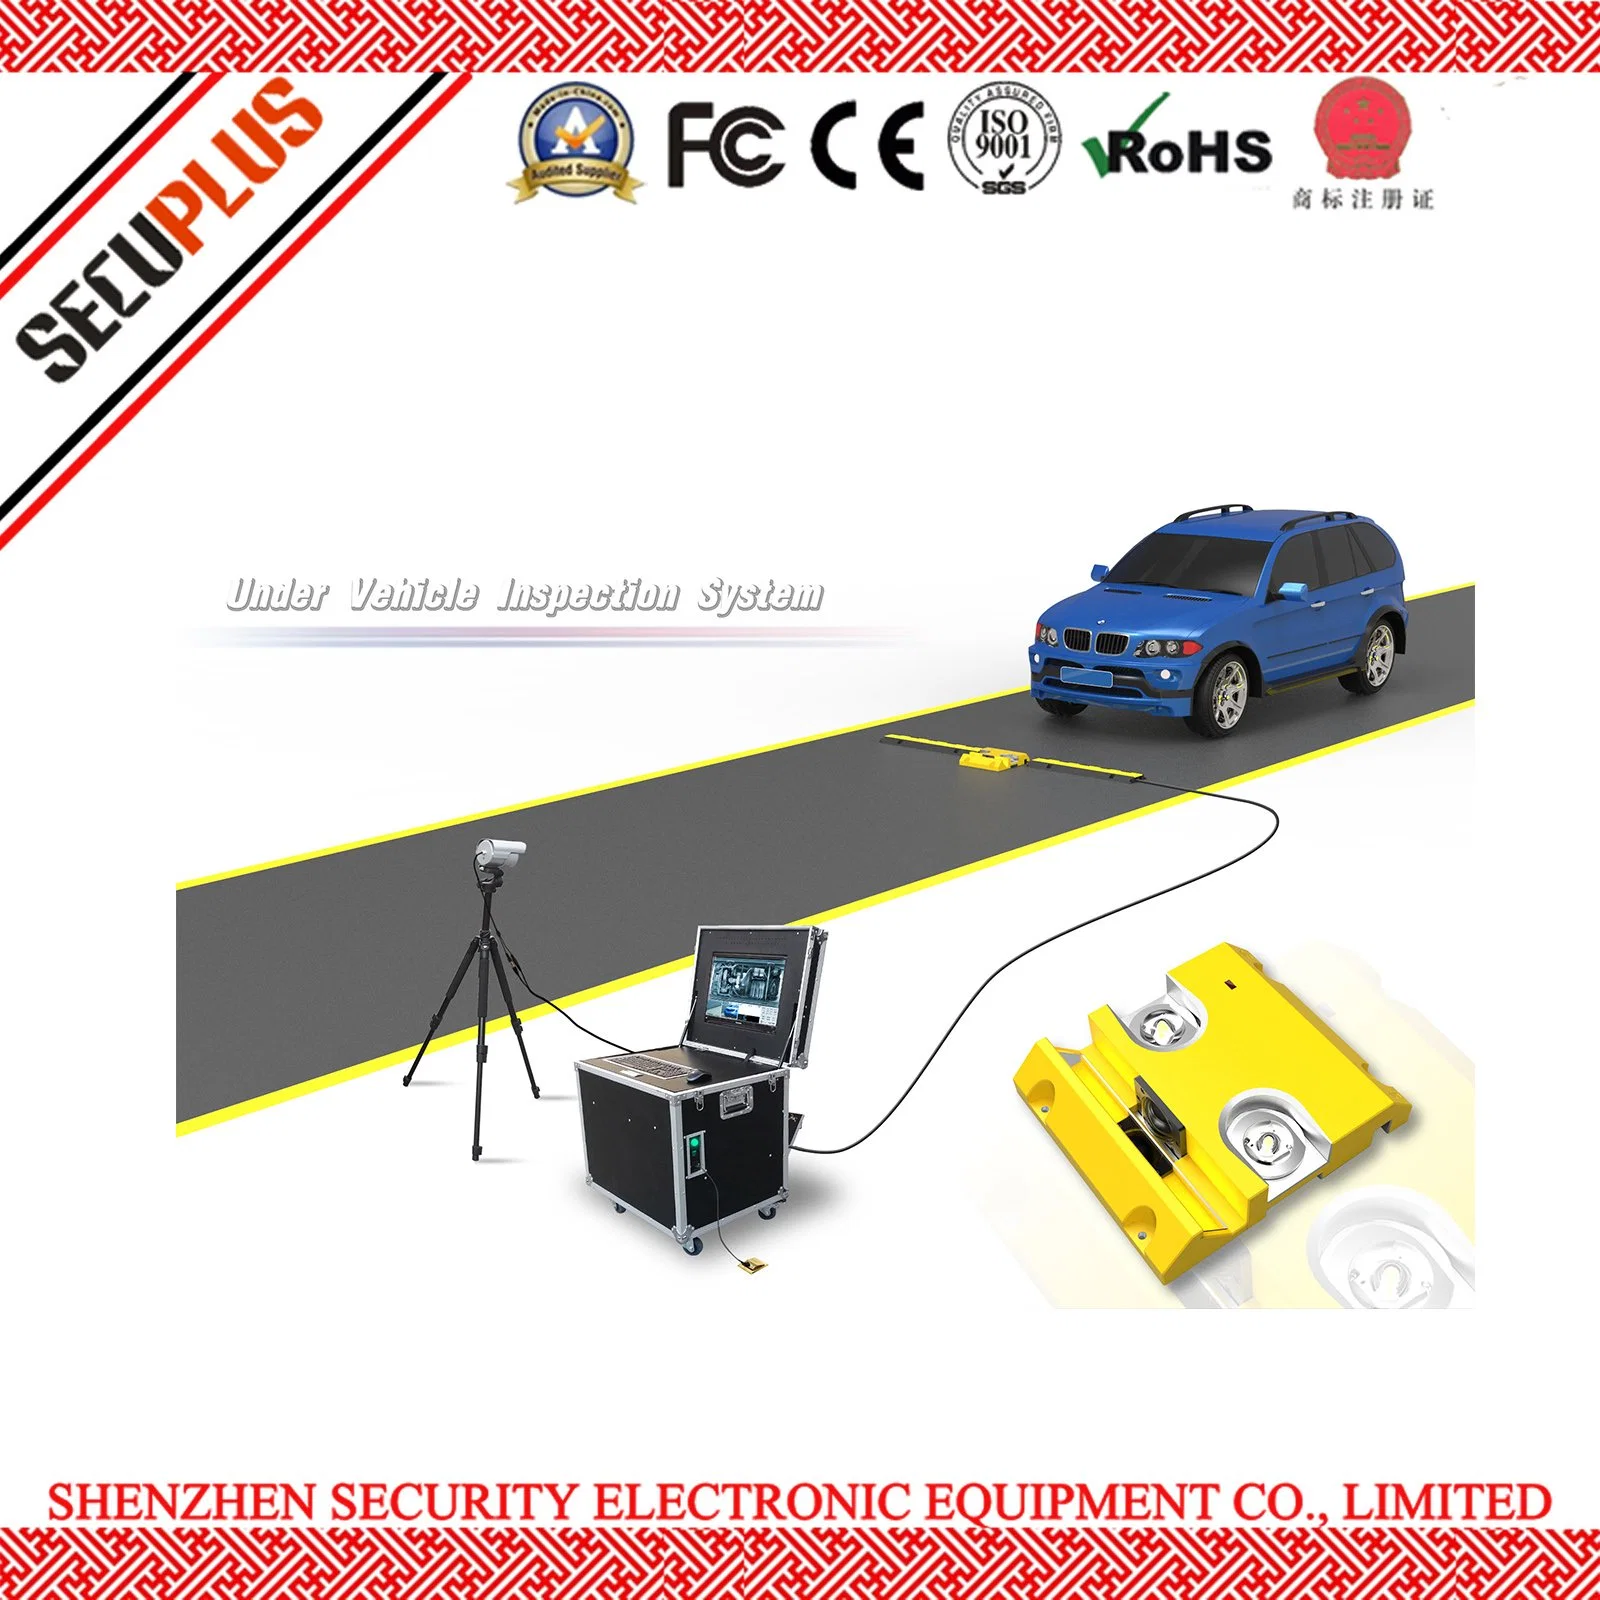 Portable Under Vehicle Inspection Surveillance Scanning System for Car Safety Checking